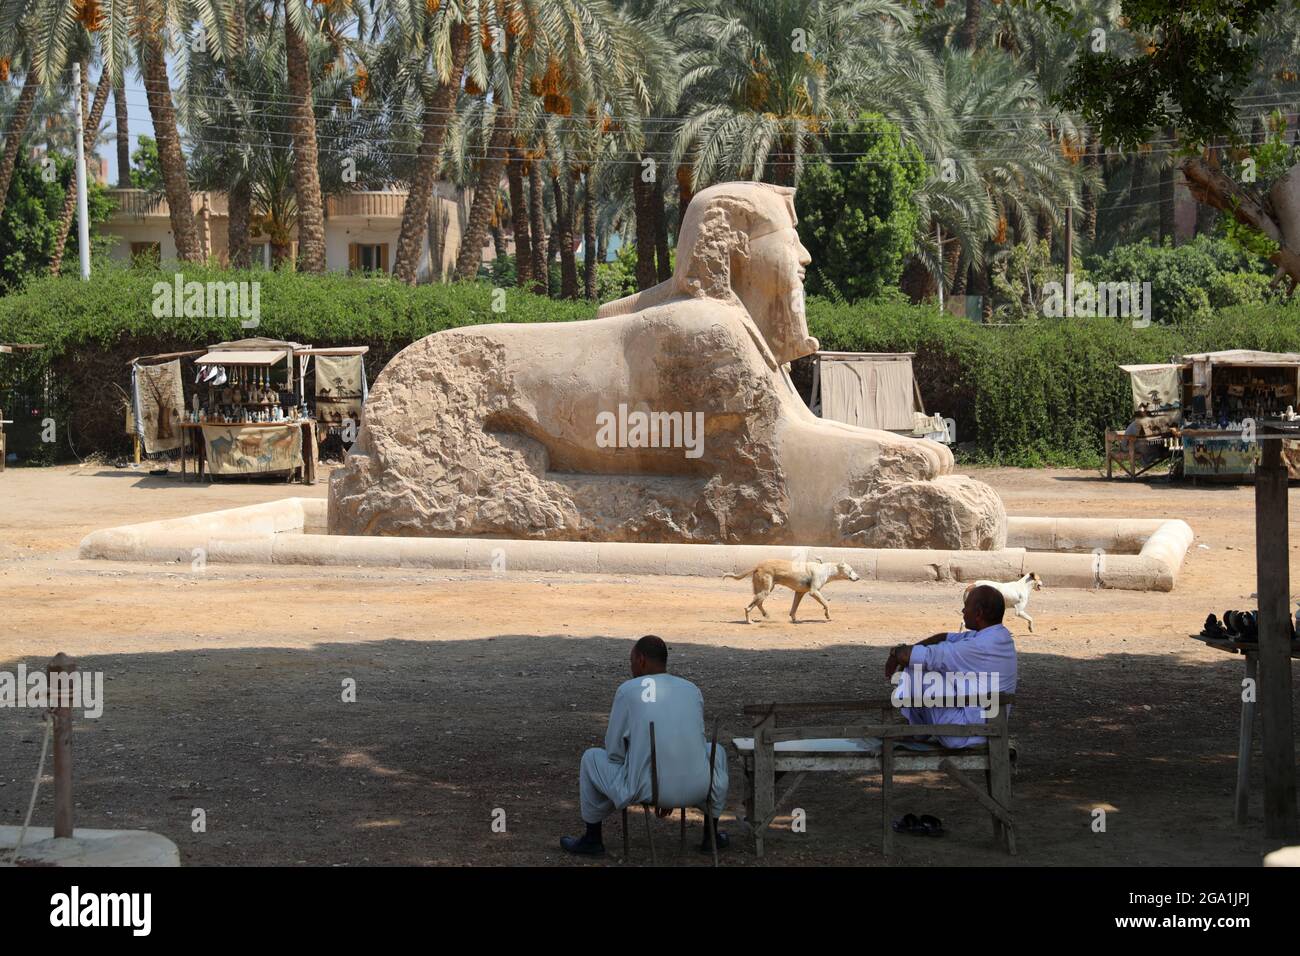 (210728) -- CAIRO, July 28, 2021 (Xinhua) -- Vendors wait for tourists by the statue of Sphinx at the ruins of ancient Egyptian city of Memphis, around 23 kilometers southwest to Cairo, capital of Egypt, July 28, 2021. Memphis, founded around 3,100 BC, was the capital of ancient Egypt during the Old Kingdom spanning from 2700-2200 BC and remained an important city throughout ancient Egyptian history. Today, the ruins of the former capital offer fragmented evidence of its past. Together with its necropolis (the pyramid fields from Giza to Dahshur), Memphis was inscribed as a World Heritage Site Stock Photo